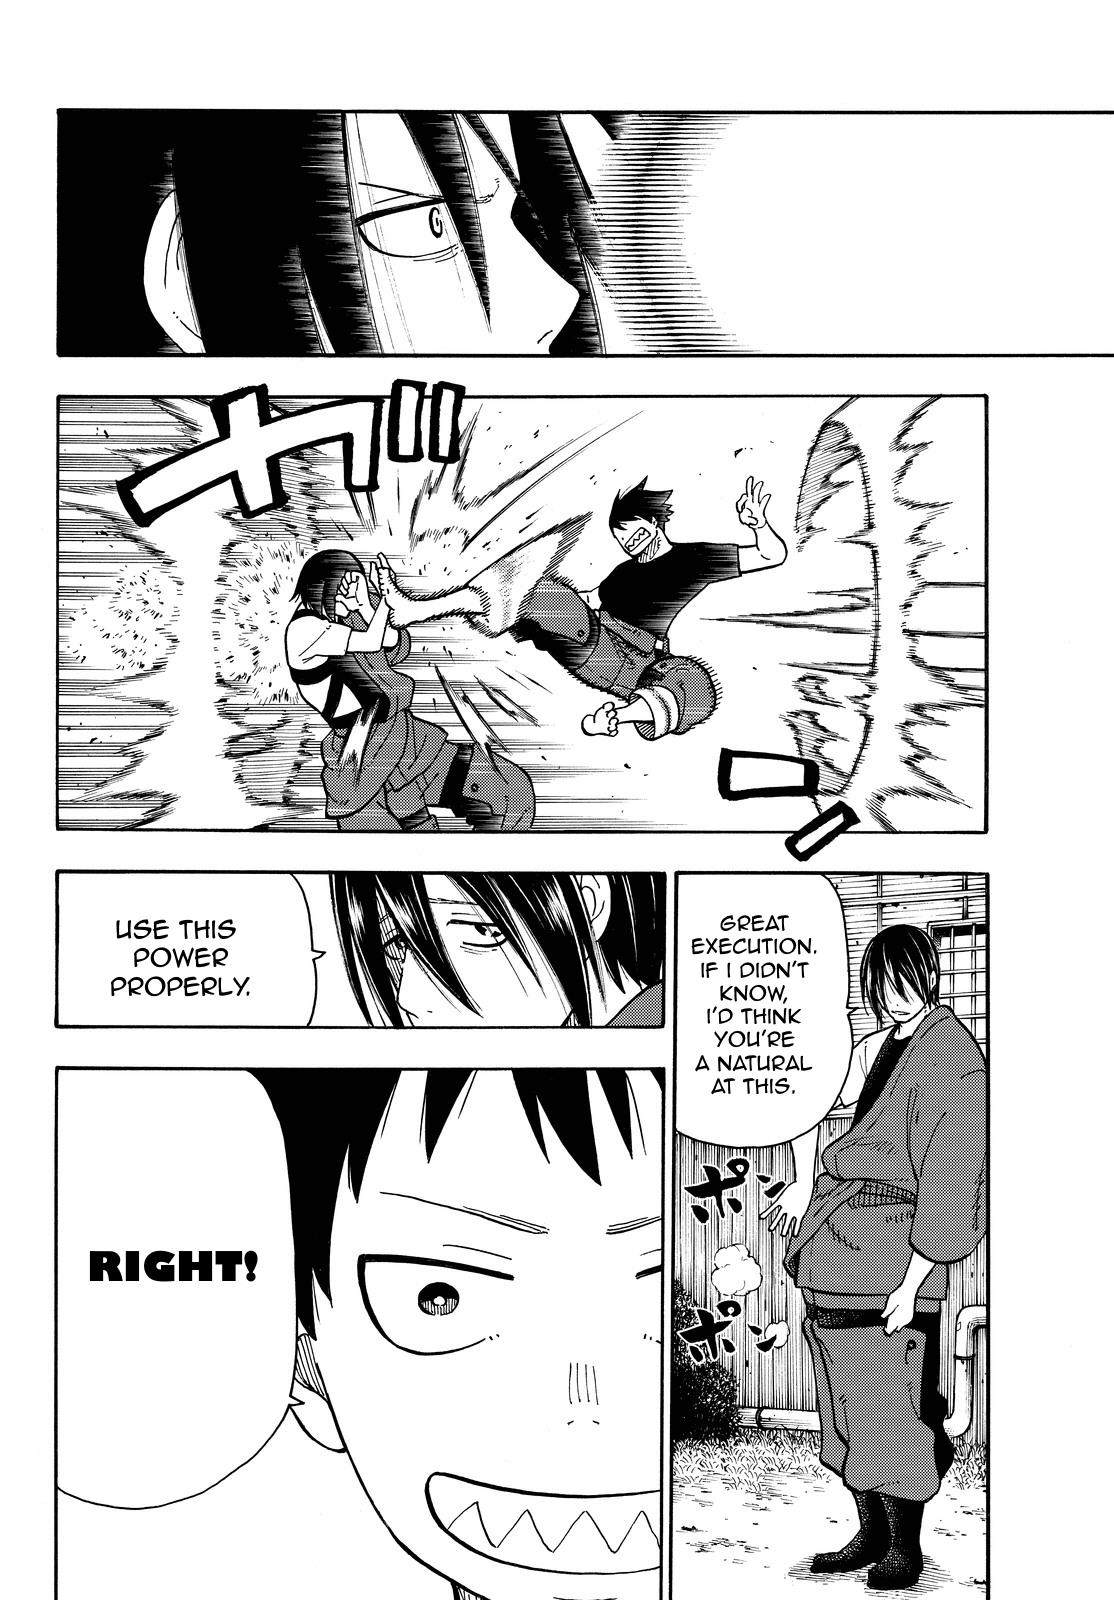 Fire Force Vol. 8 Ch. 66 The Results of Each